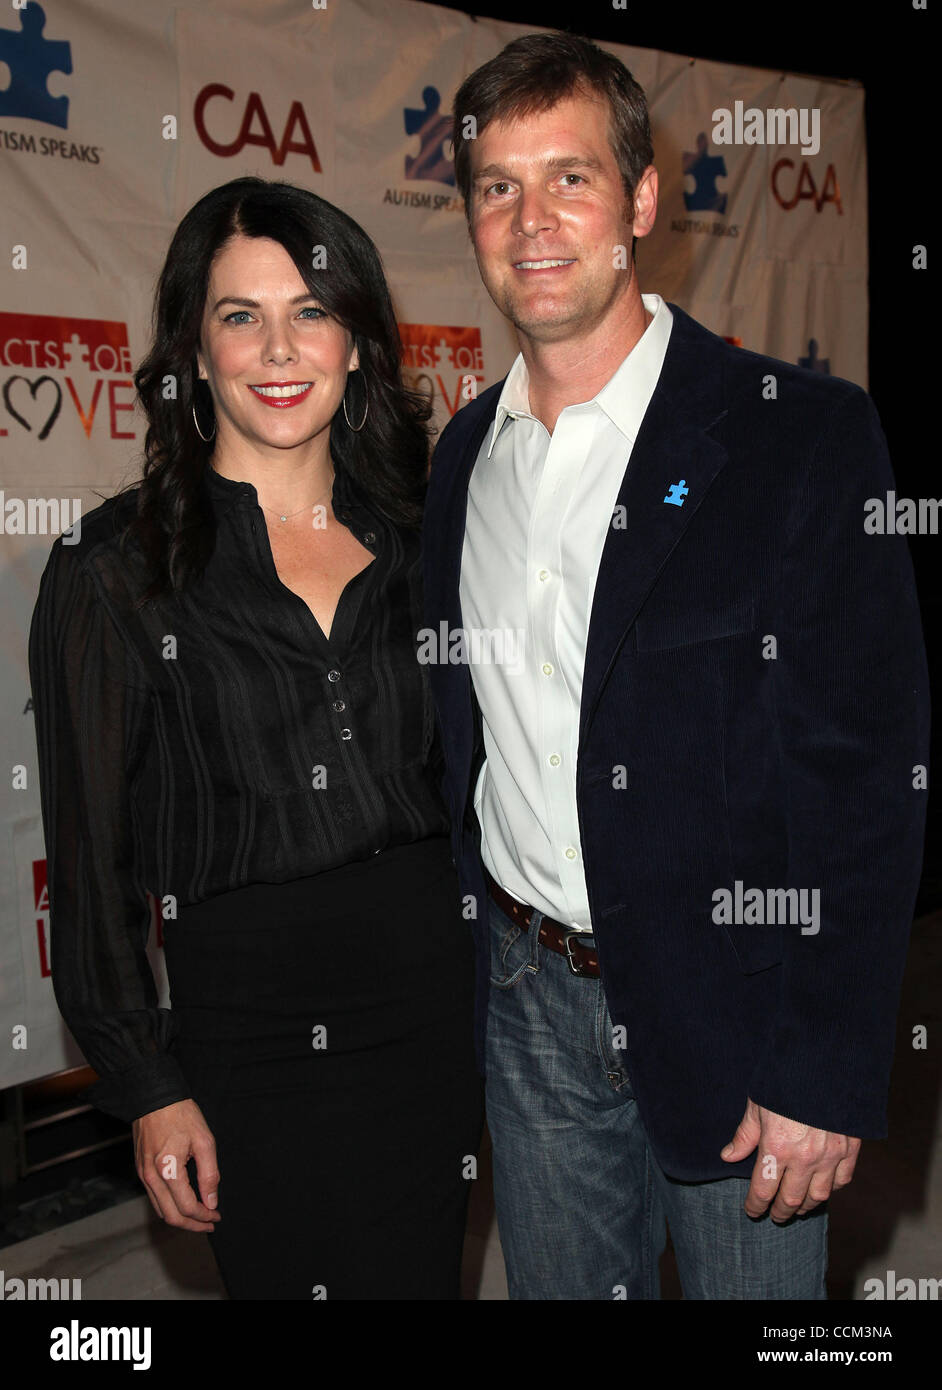 LAUREN GRAHAM & PETER KRAUSE arrives for the 8th Annual 'Acts of Love' to support Autism Awareness at CAA. (Credit Image: © Lisa O'Connor/ZUMApress.com) Stock Photo